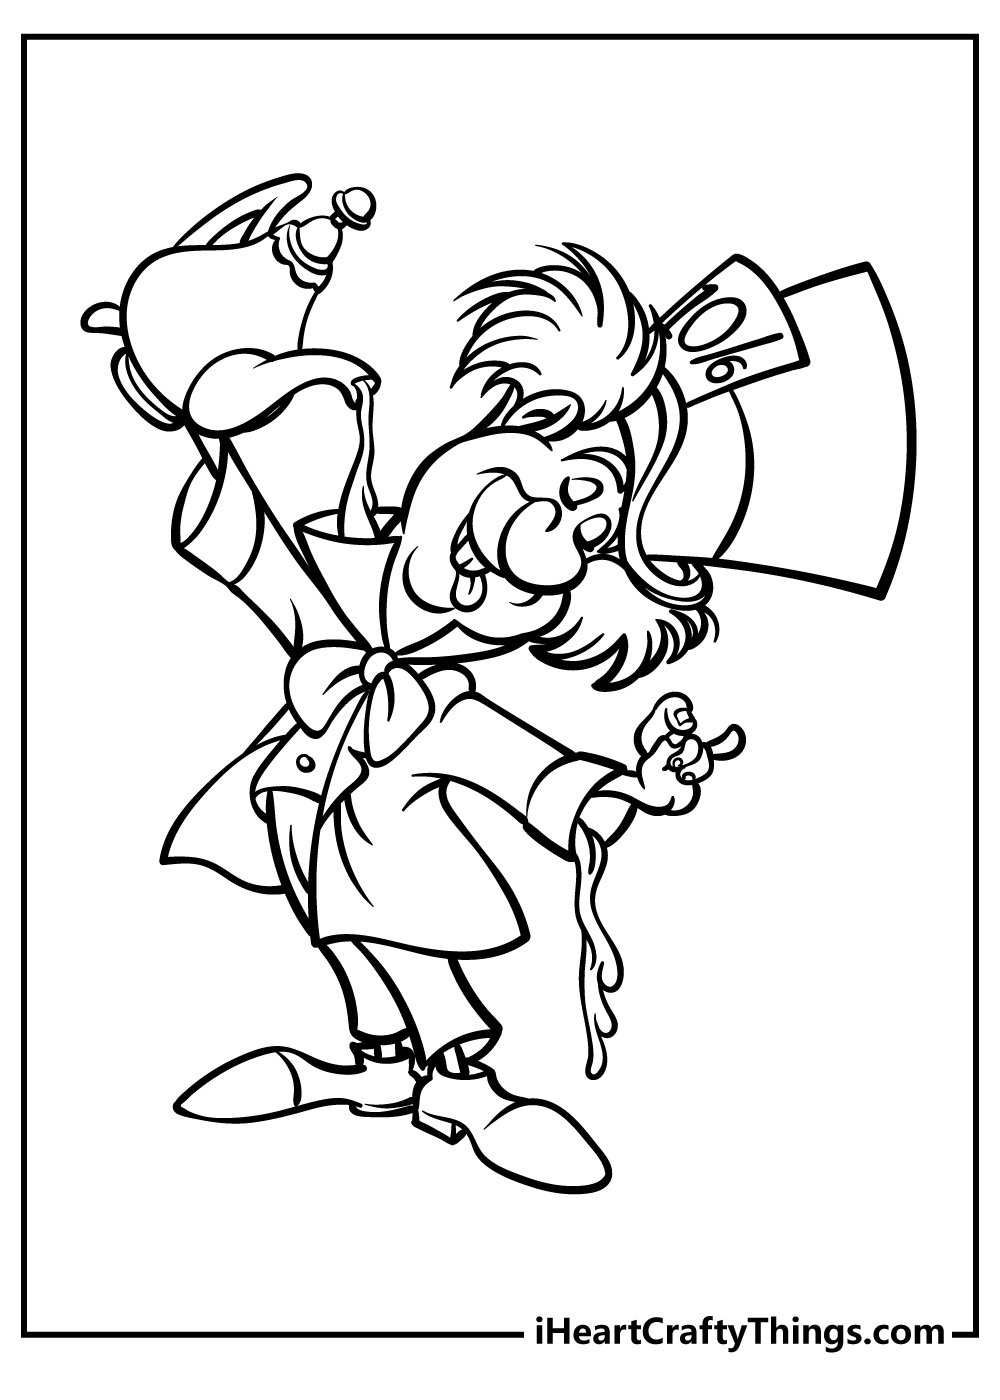 Alice In Wonderland Coloring Book for adults free download